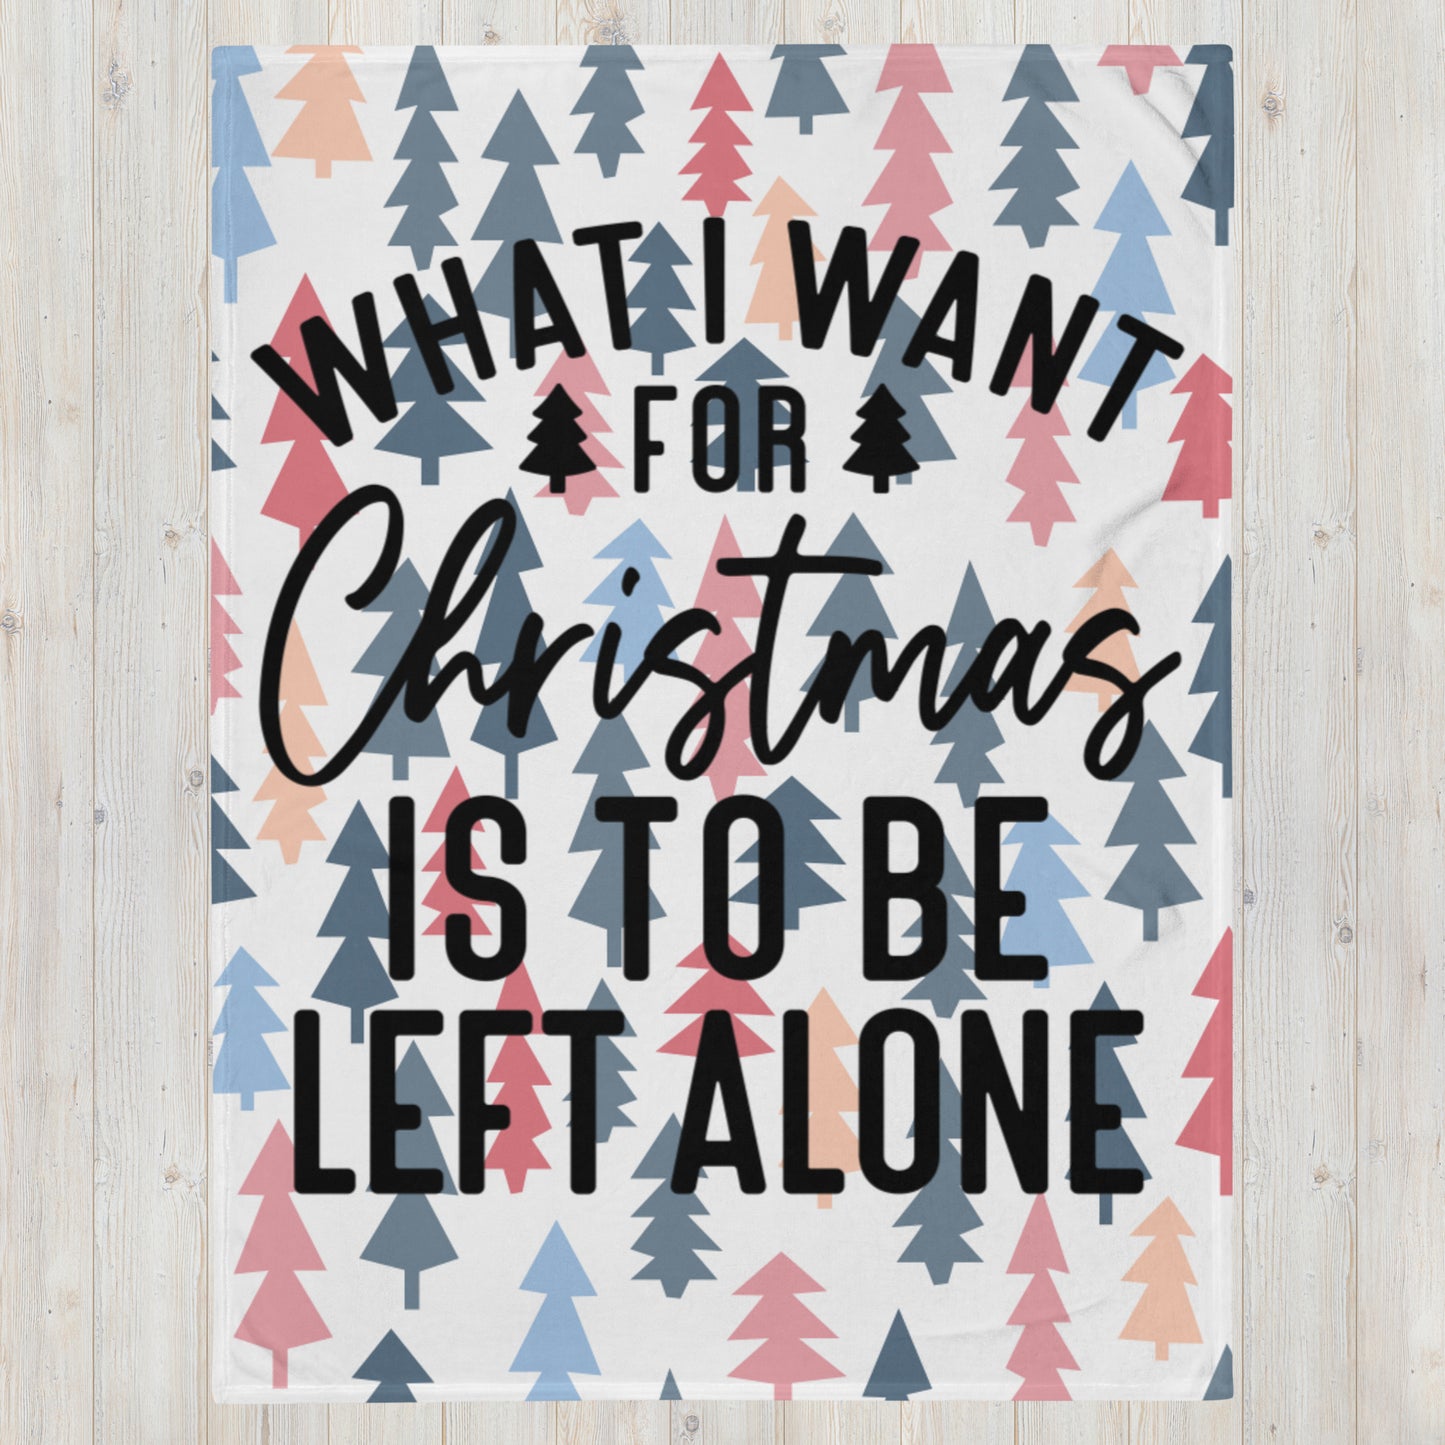 WHAT I WANT FOR CHRISTMAS, IS TO BE LEFT ALONE- Throw Blanket